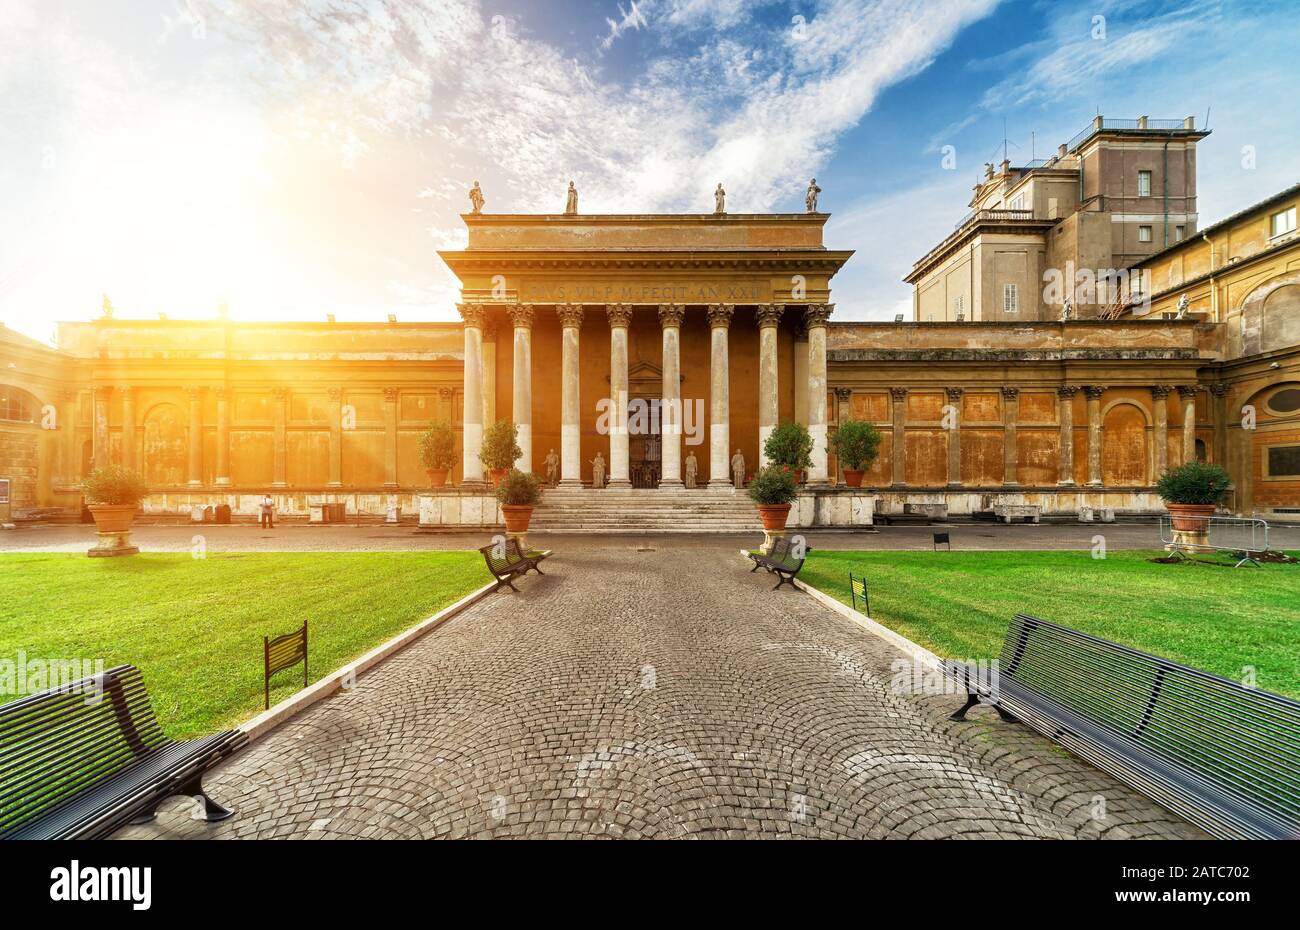 Belvedere Courtyard in Vatican. Old palace in Vatican City, Italy. Stock Photo